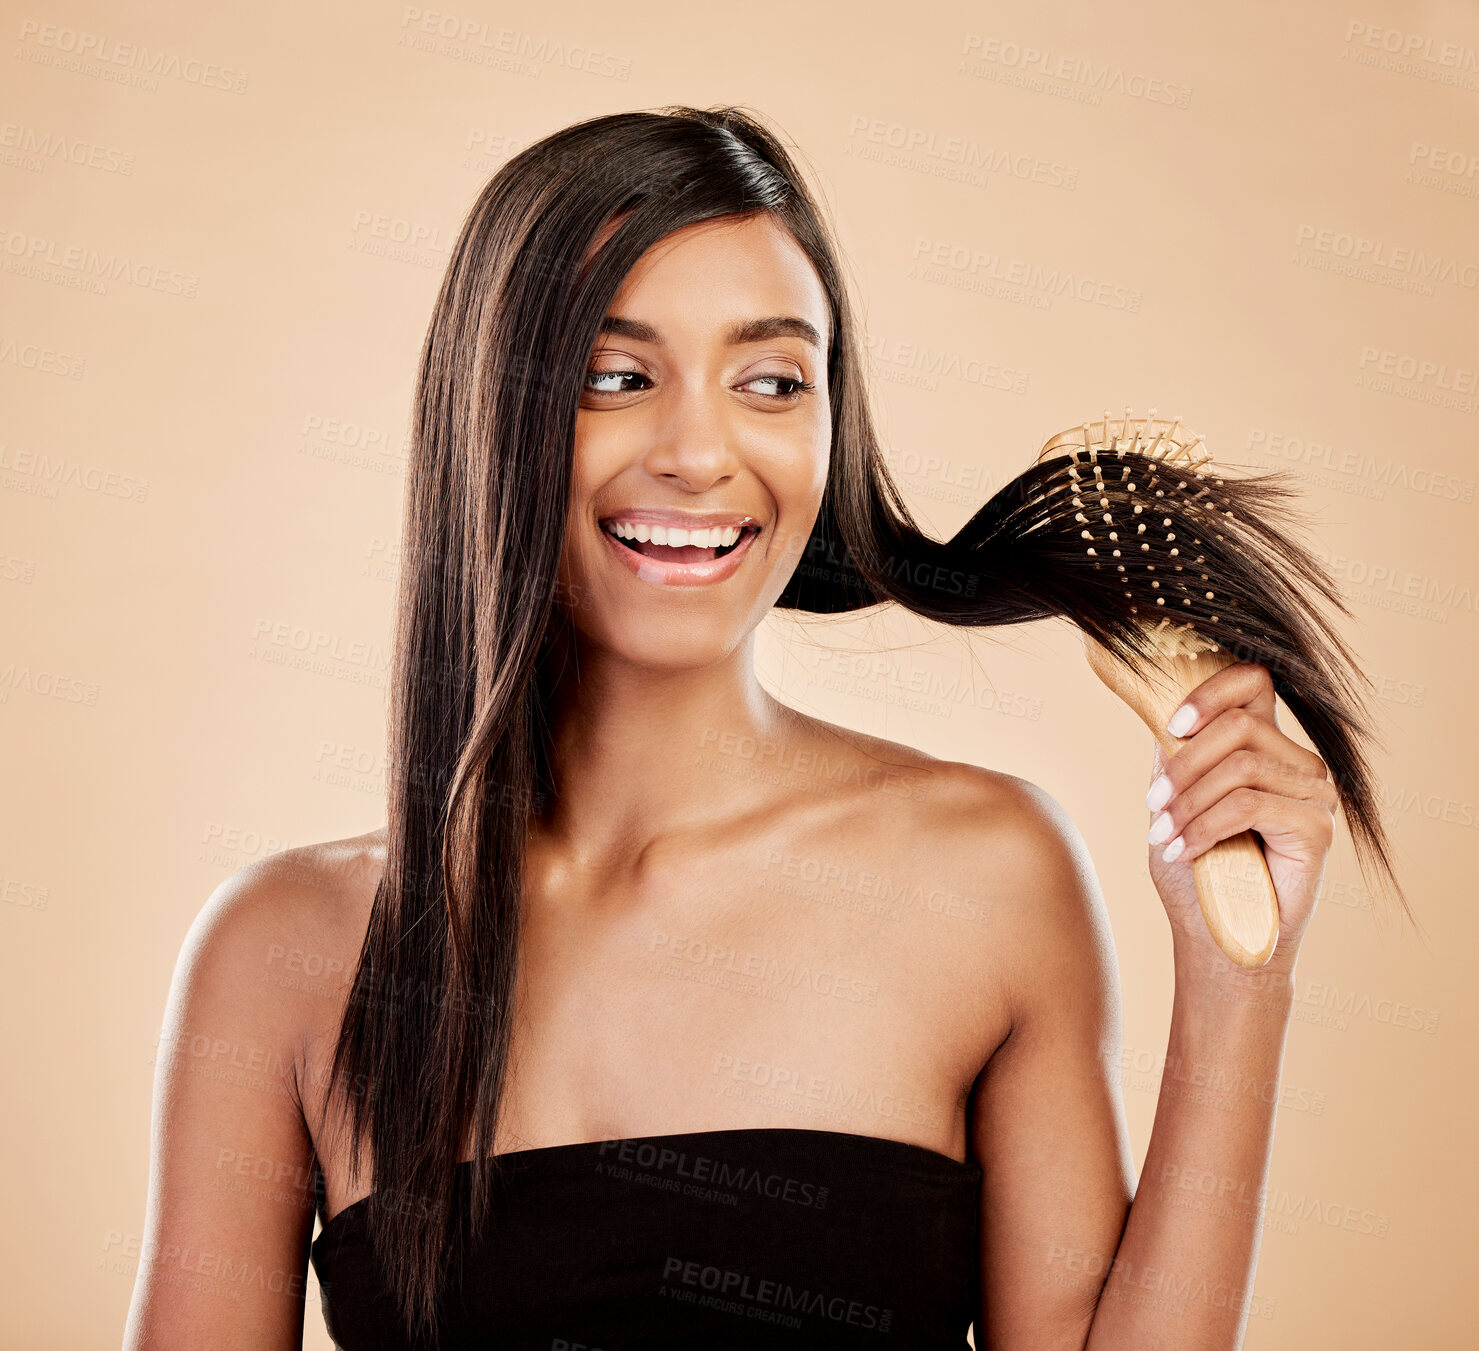 Buy stock photo Smile, beauty and a woman brushing her hair in studio on a cream background for natural or luxury style. Haircare, face and shampoo with a happy young indian female model at the salon or hairdresser